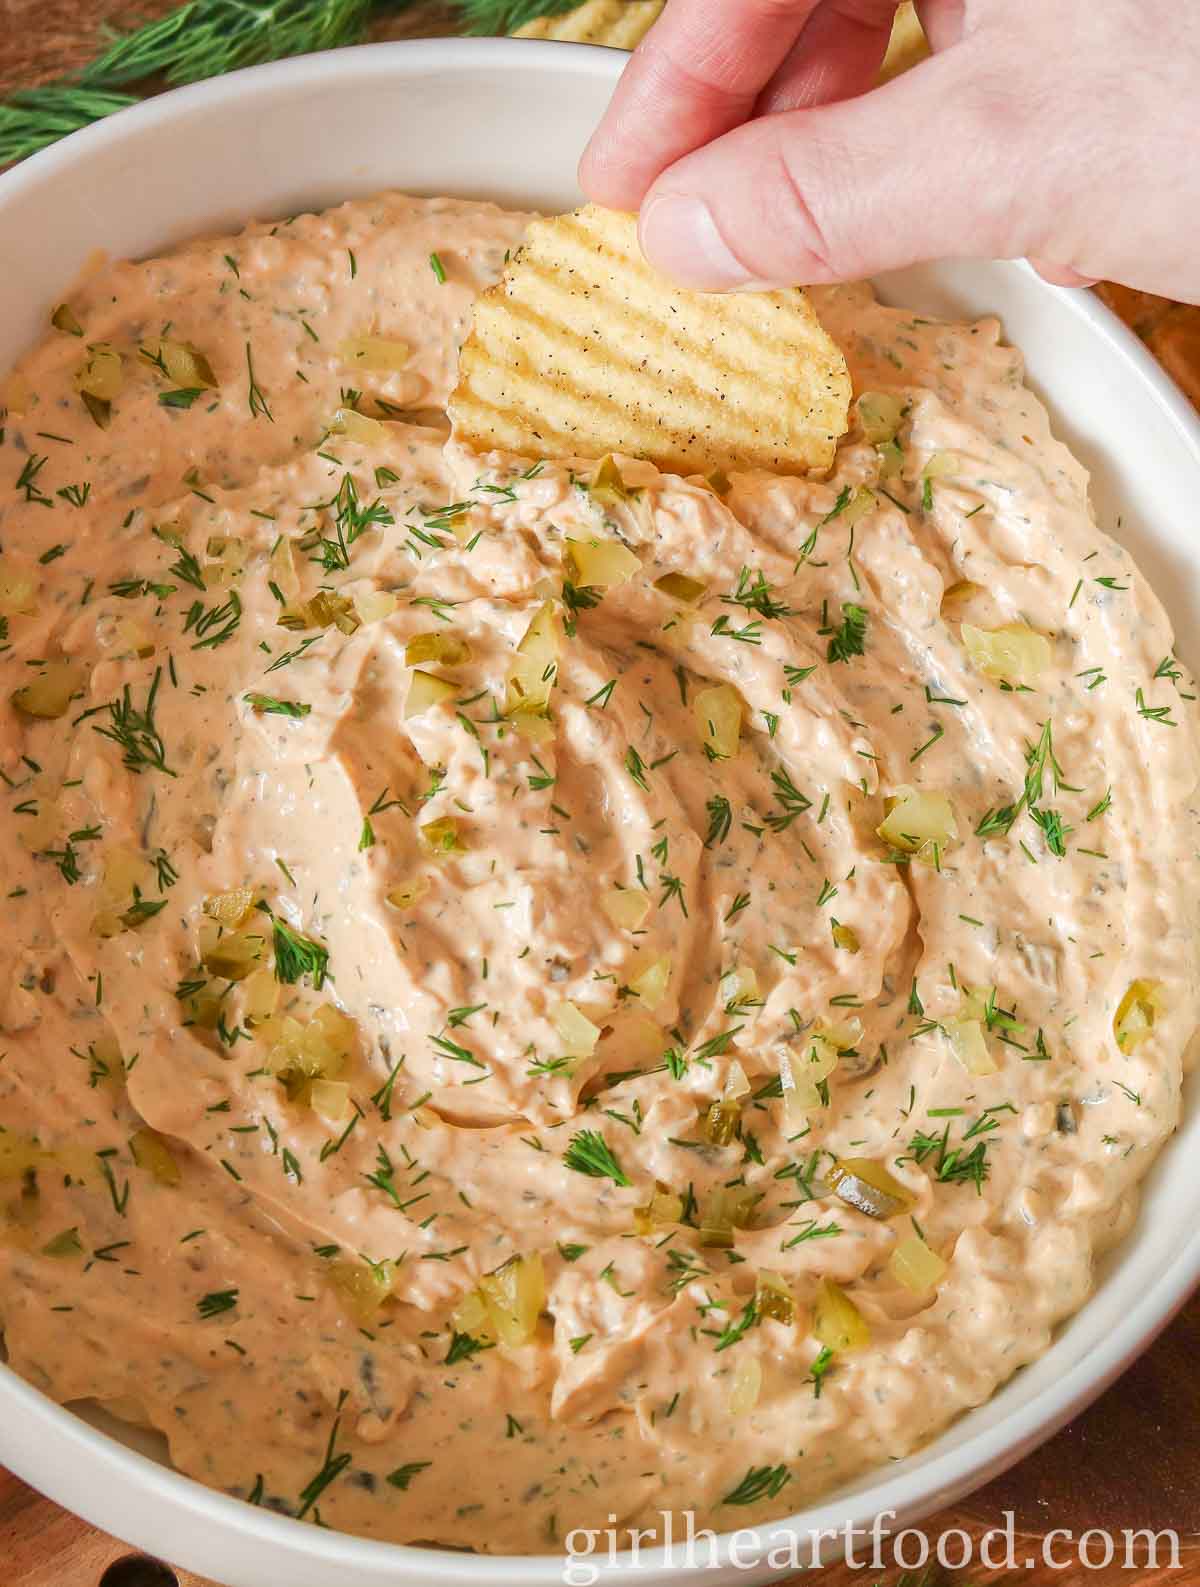 Hand dipping a potato chip into a bowl of dill pickle dip.